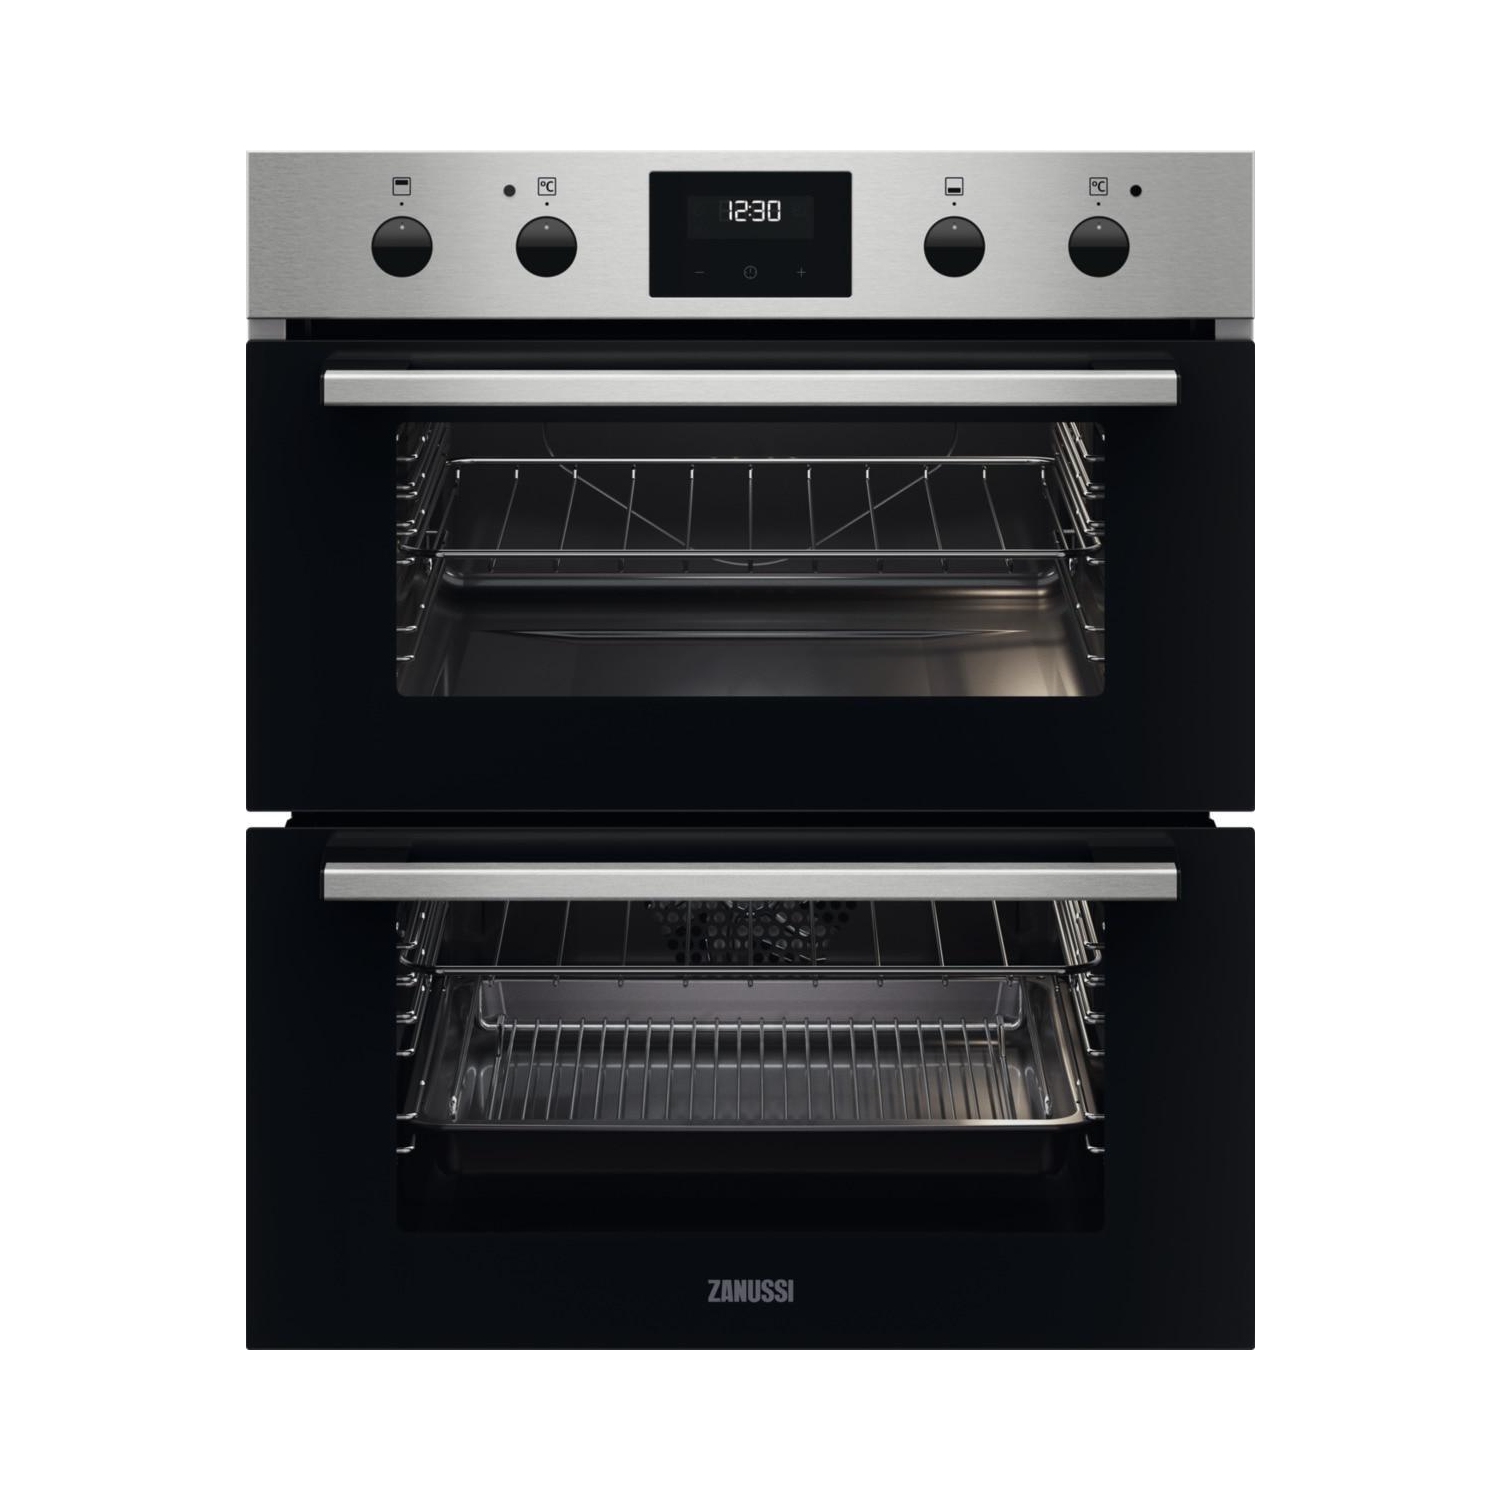 Zanussi Built Under Double Oven - Stainless Steel - 0